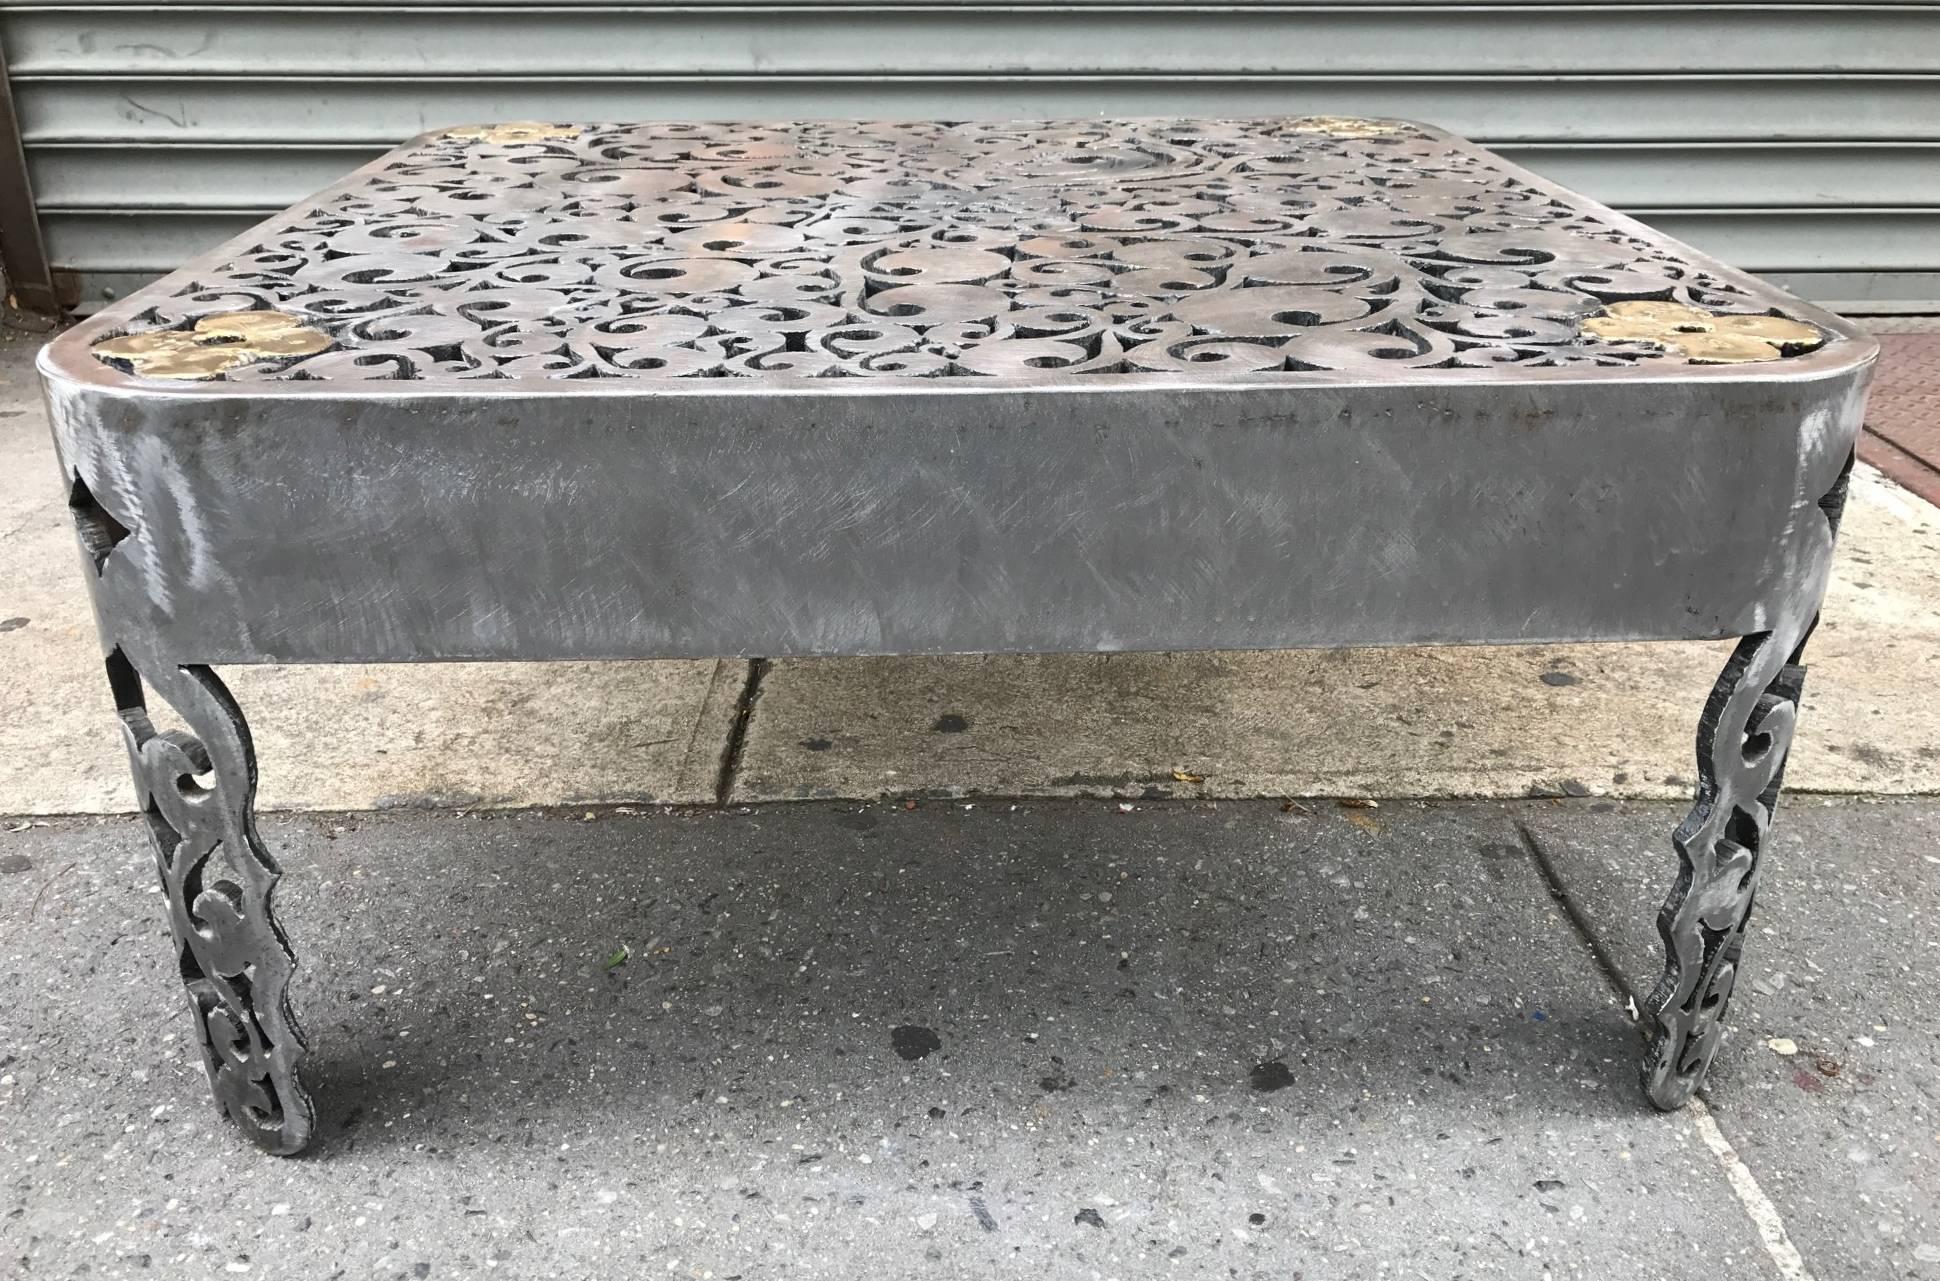 Signed Brutalist cut steel coffee table. The table is handmade torched cut and welded steel with a decorative pattern to the top. The top has bronze finished flowers on all four corners. Signed by the sculptor.